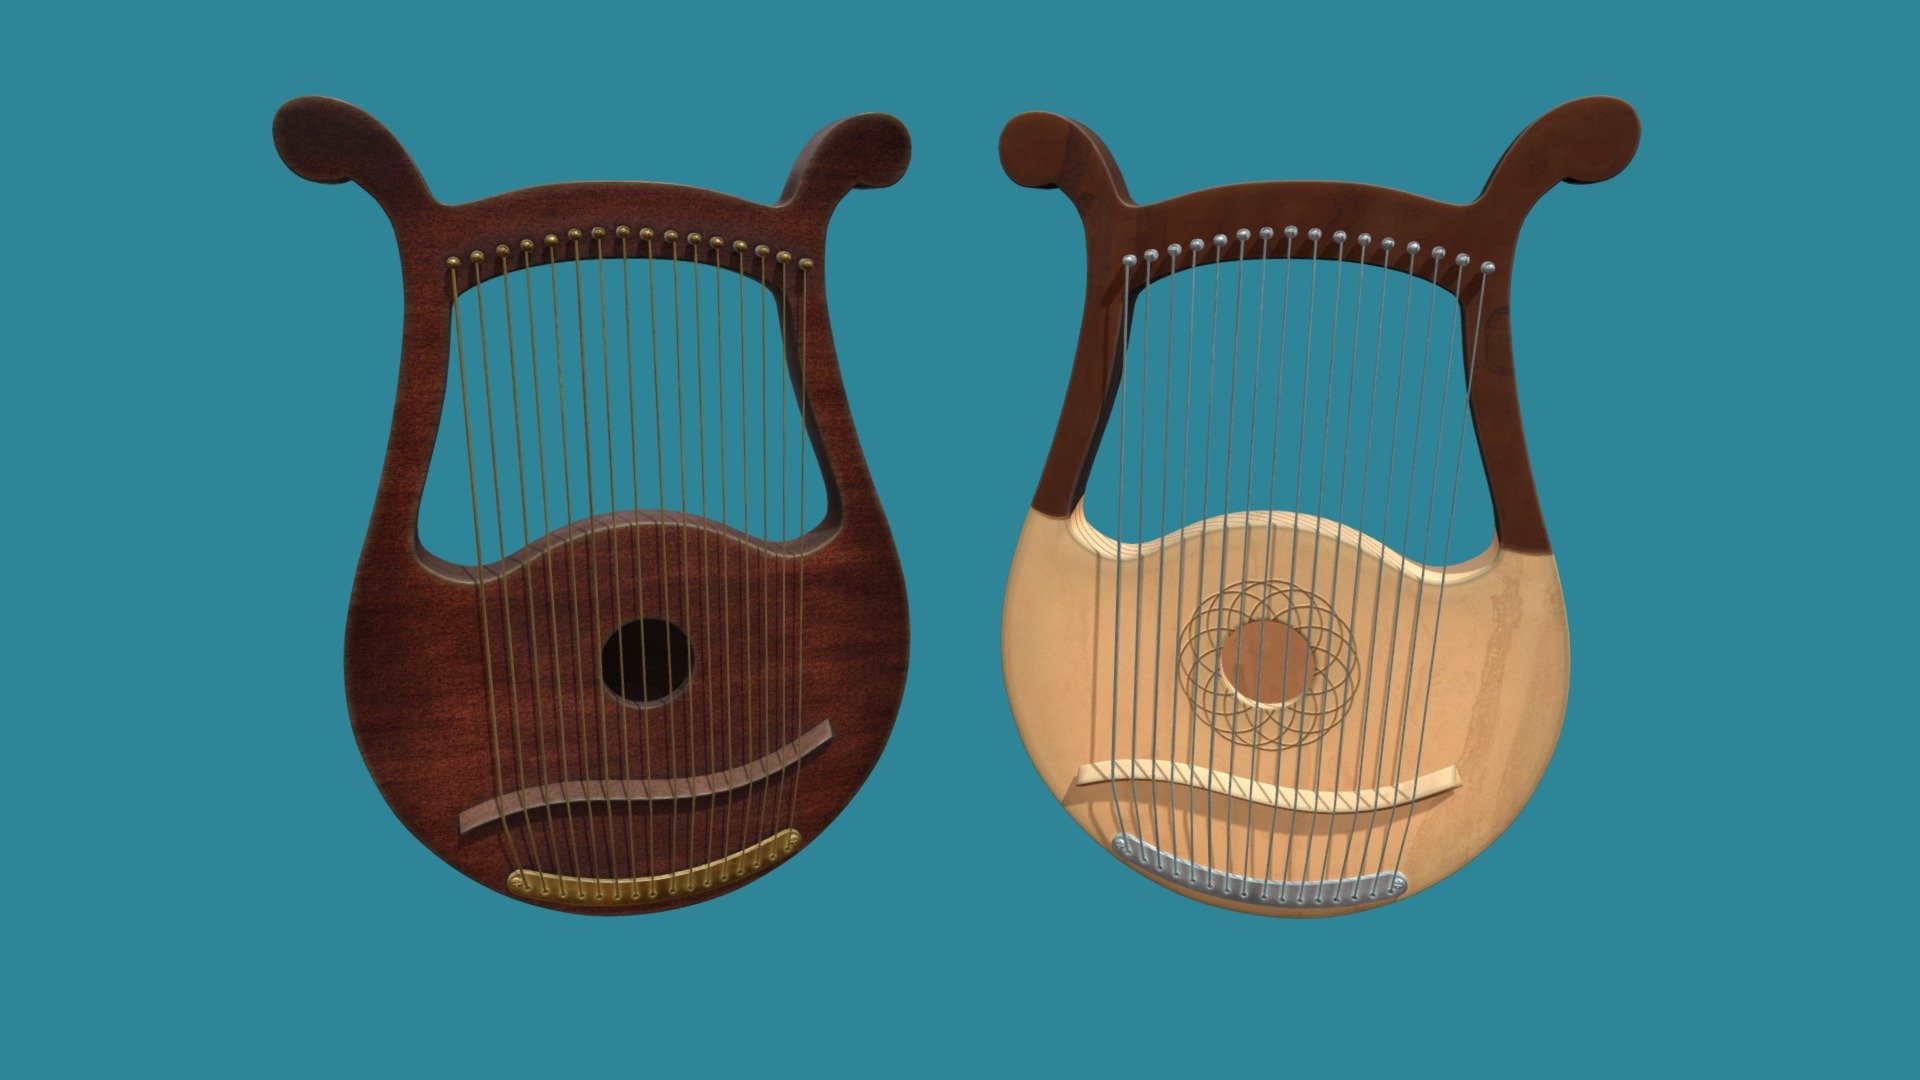 Realistic lyre with 16 strings created in Blender.

This model is available in the following file formats:




.blend (Blender native format)

.fbx (Autodesk fbx)

.obj (Object file with mtl)

.abc (Alembic)

.dae (Collada)

.stl (Stereolithography)

.glb

The file contains the 3D model and the textures, there is no light preset.
There is a zip file with some renders in PNG format with alpha/transparency.

The model has a non-overlapping UV-Map.
The polygons in the model are mostly Quads.

Polygons




Verts 39150

Faces 37686

Tris 74892

There are two sets of textures with different colors.
Included texture maps: Base Color, Metallic, Roughness, Ambient Occlusion, Specular,
OpenGL Normal, DirectX Normal.

The textures are in PNG format and they are available in different dimensions:
* 2048x2048
* 1024x1024

Dimensions of the 3D model: 0.31m x 0.04m x 0.45m - Lyre - Buy Royalty Free 3D model by GattalupaGames 3d model